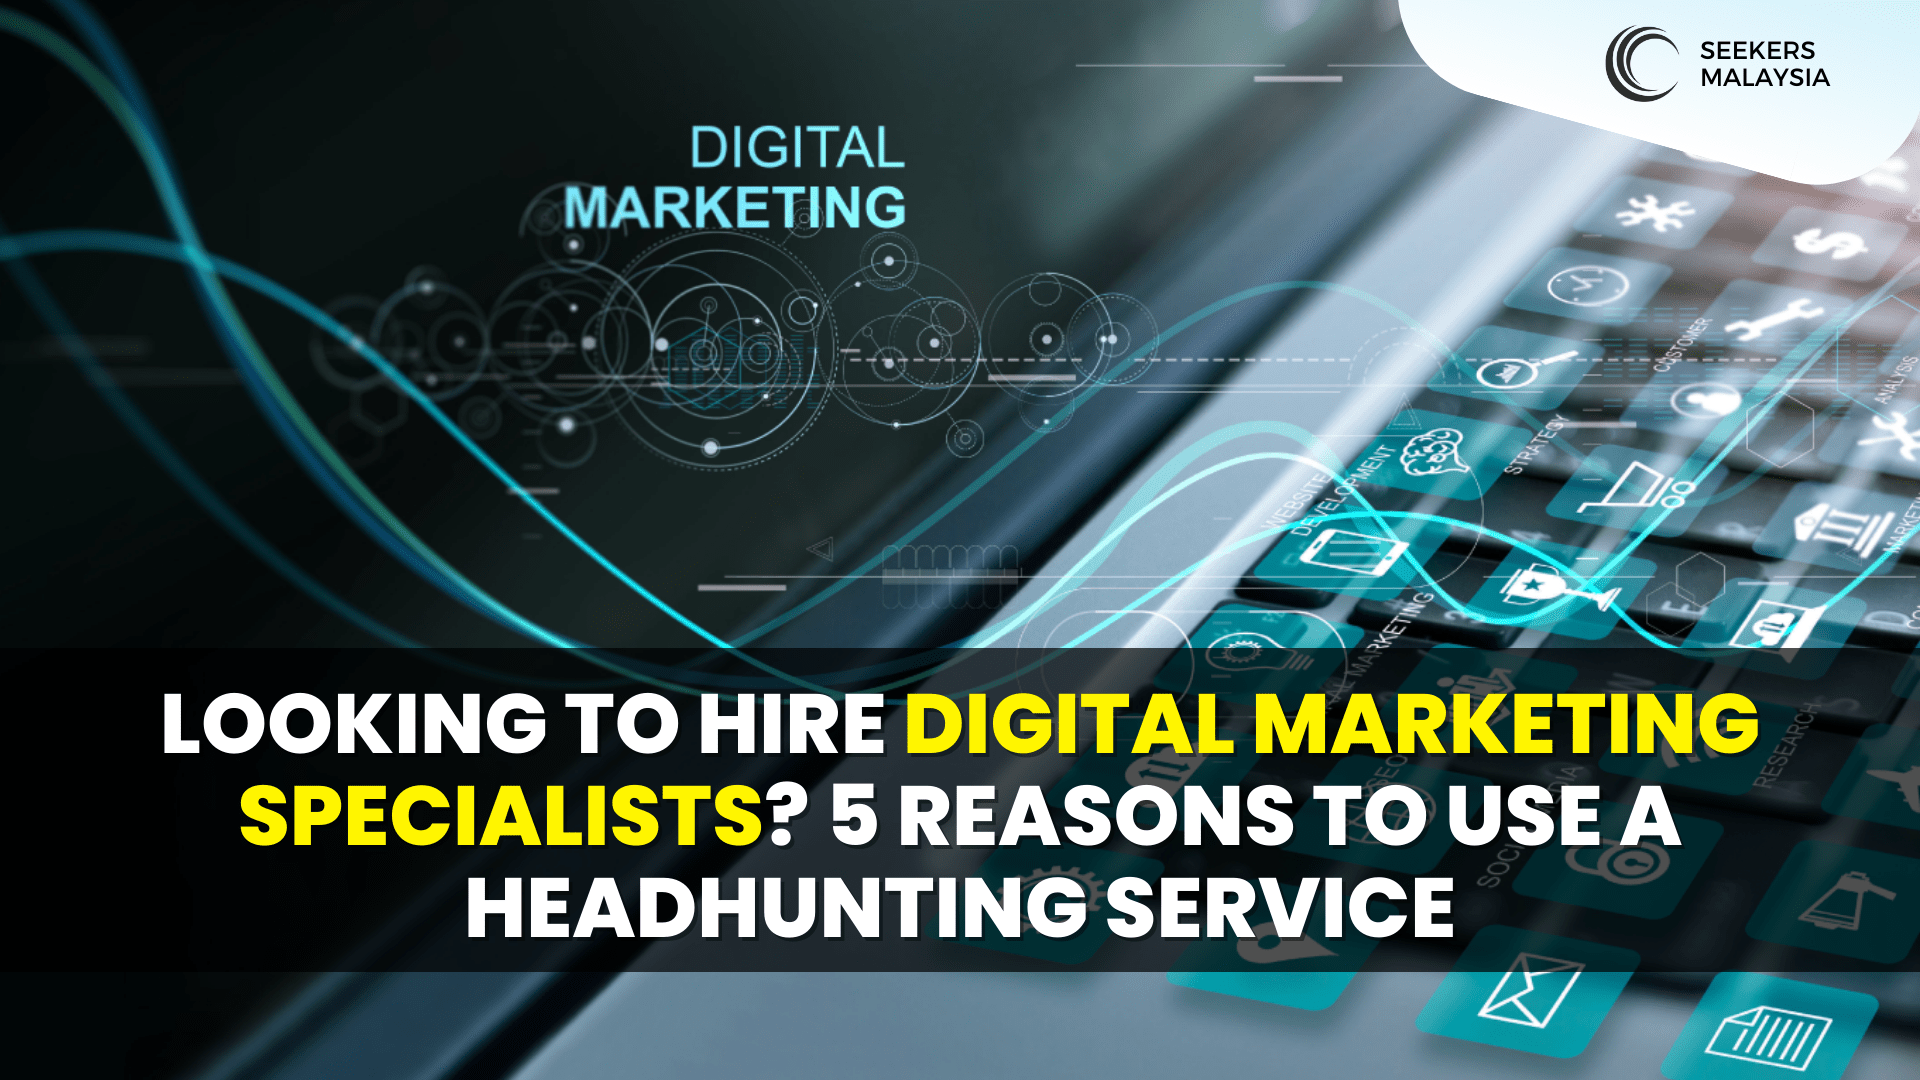 Looking to Hire Digital Marketing Specialists? 5 Reasons to Use a Headhunting Service